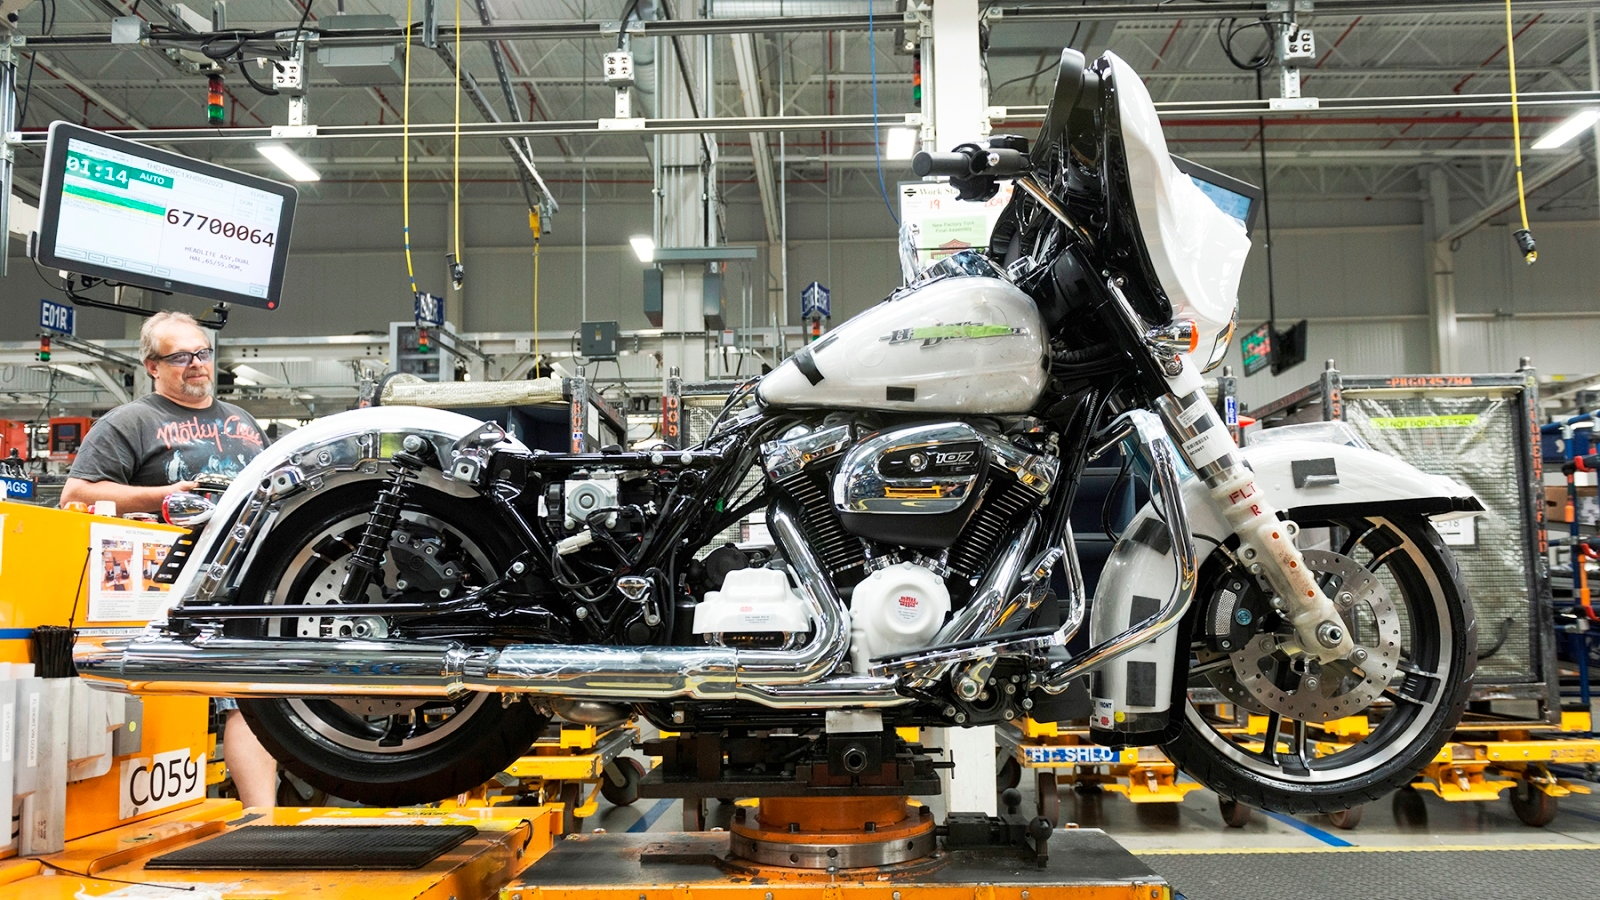 Harley Davidson S York Pa Plant As An Example To The World Photos Hdforums